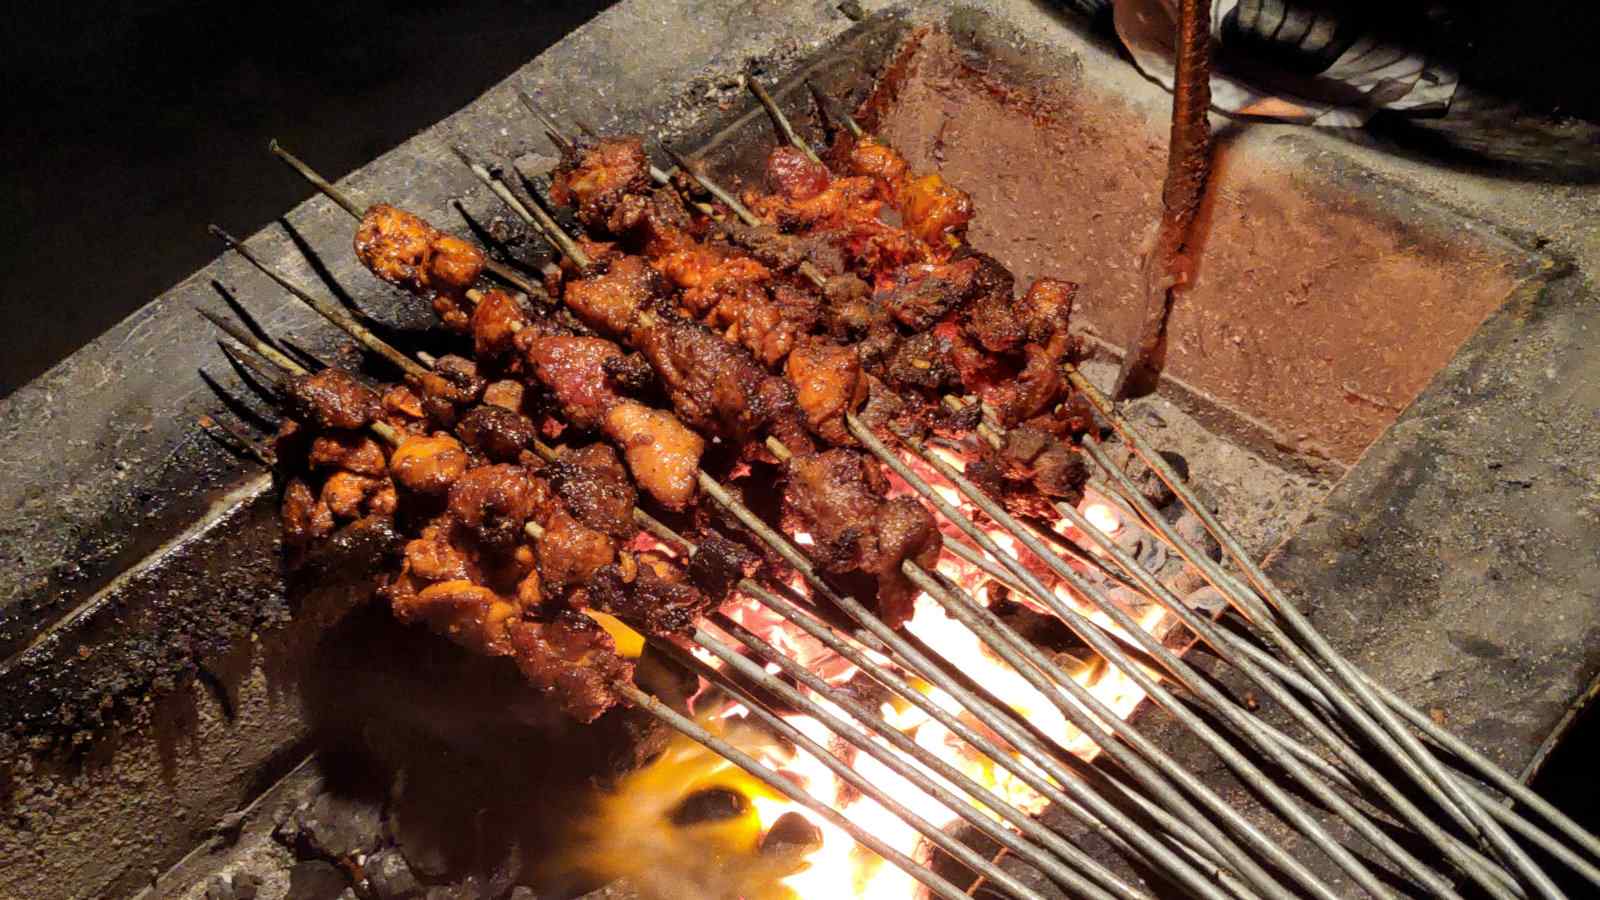 We love eating the skewers of marinated meat called sekuwa when we're in Nepal!